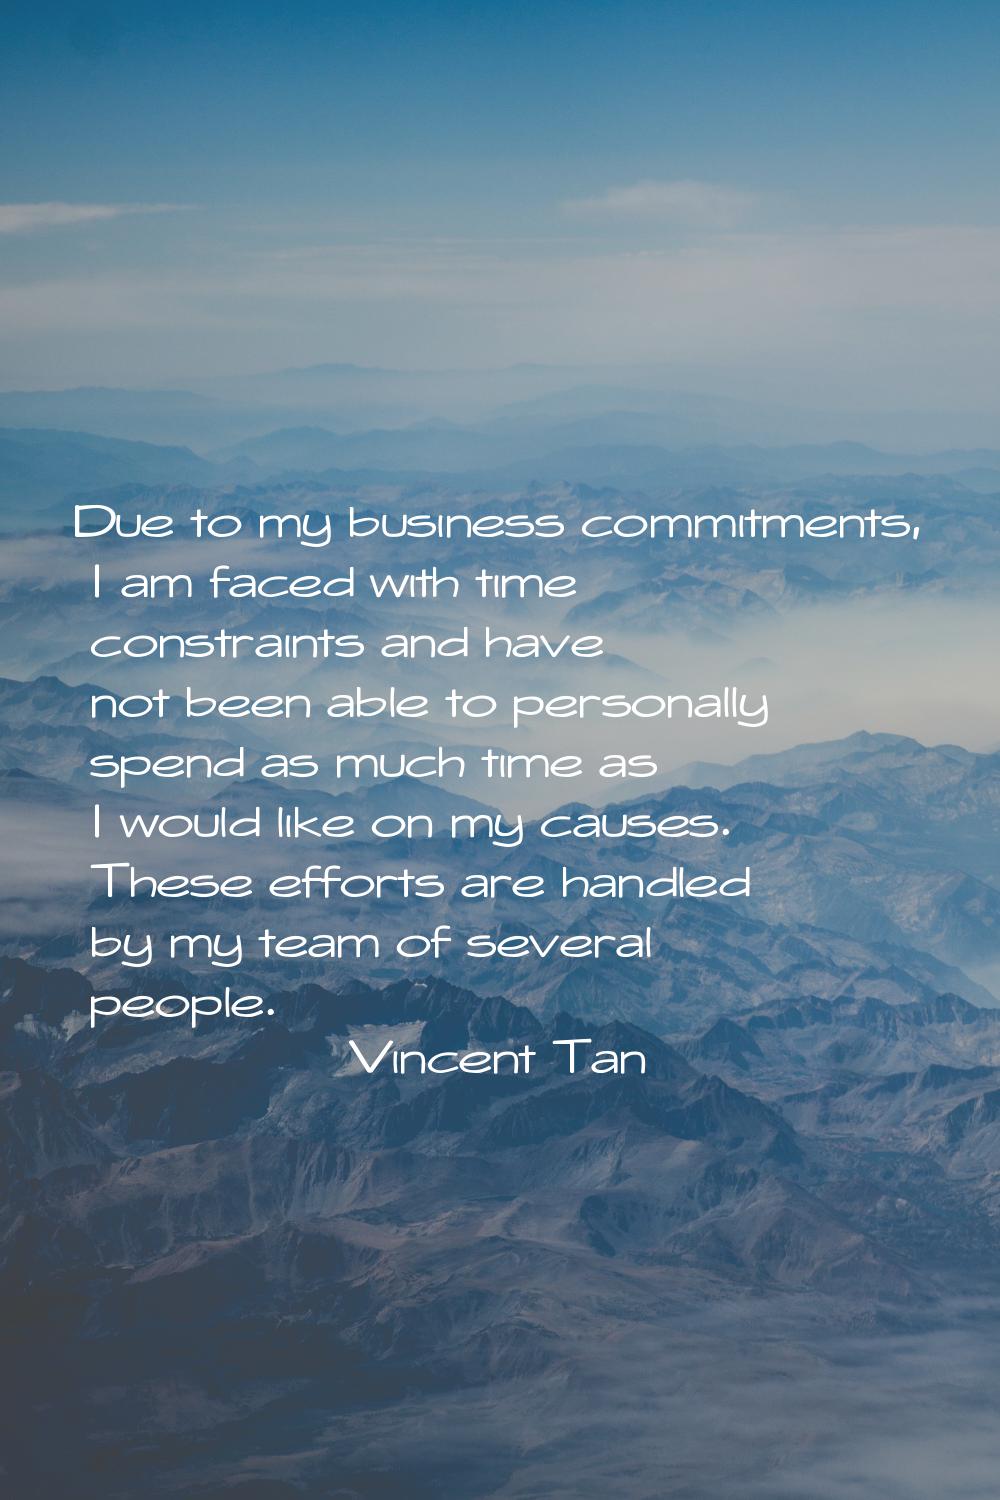 Due to my business commitments, I am faced with time constraints and have not been able to personal